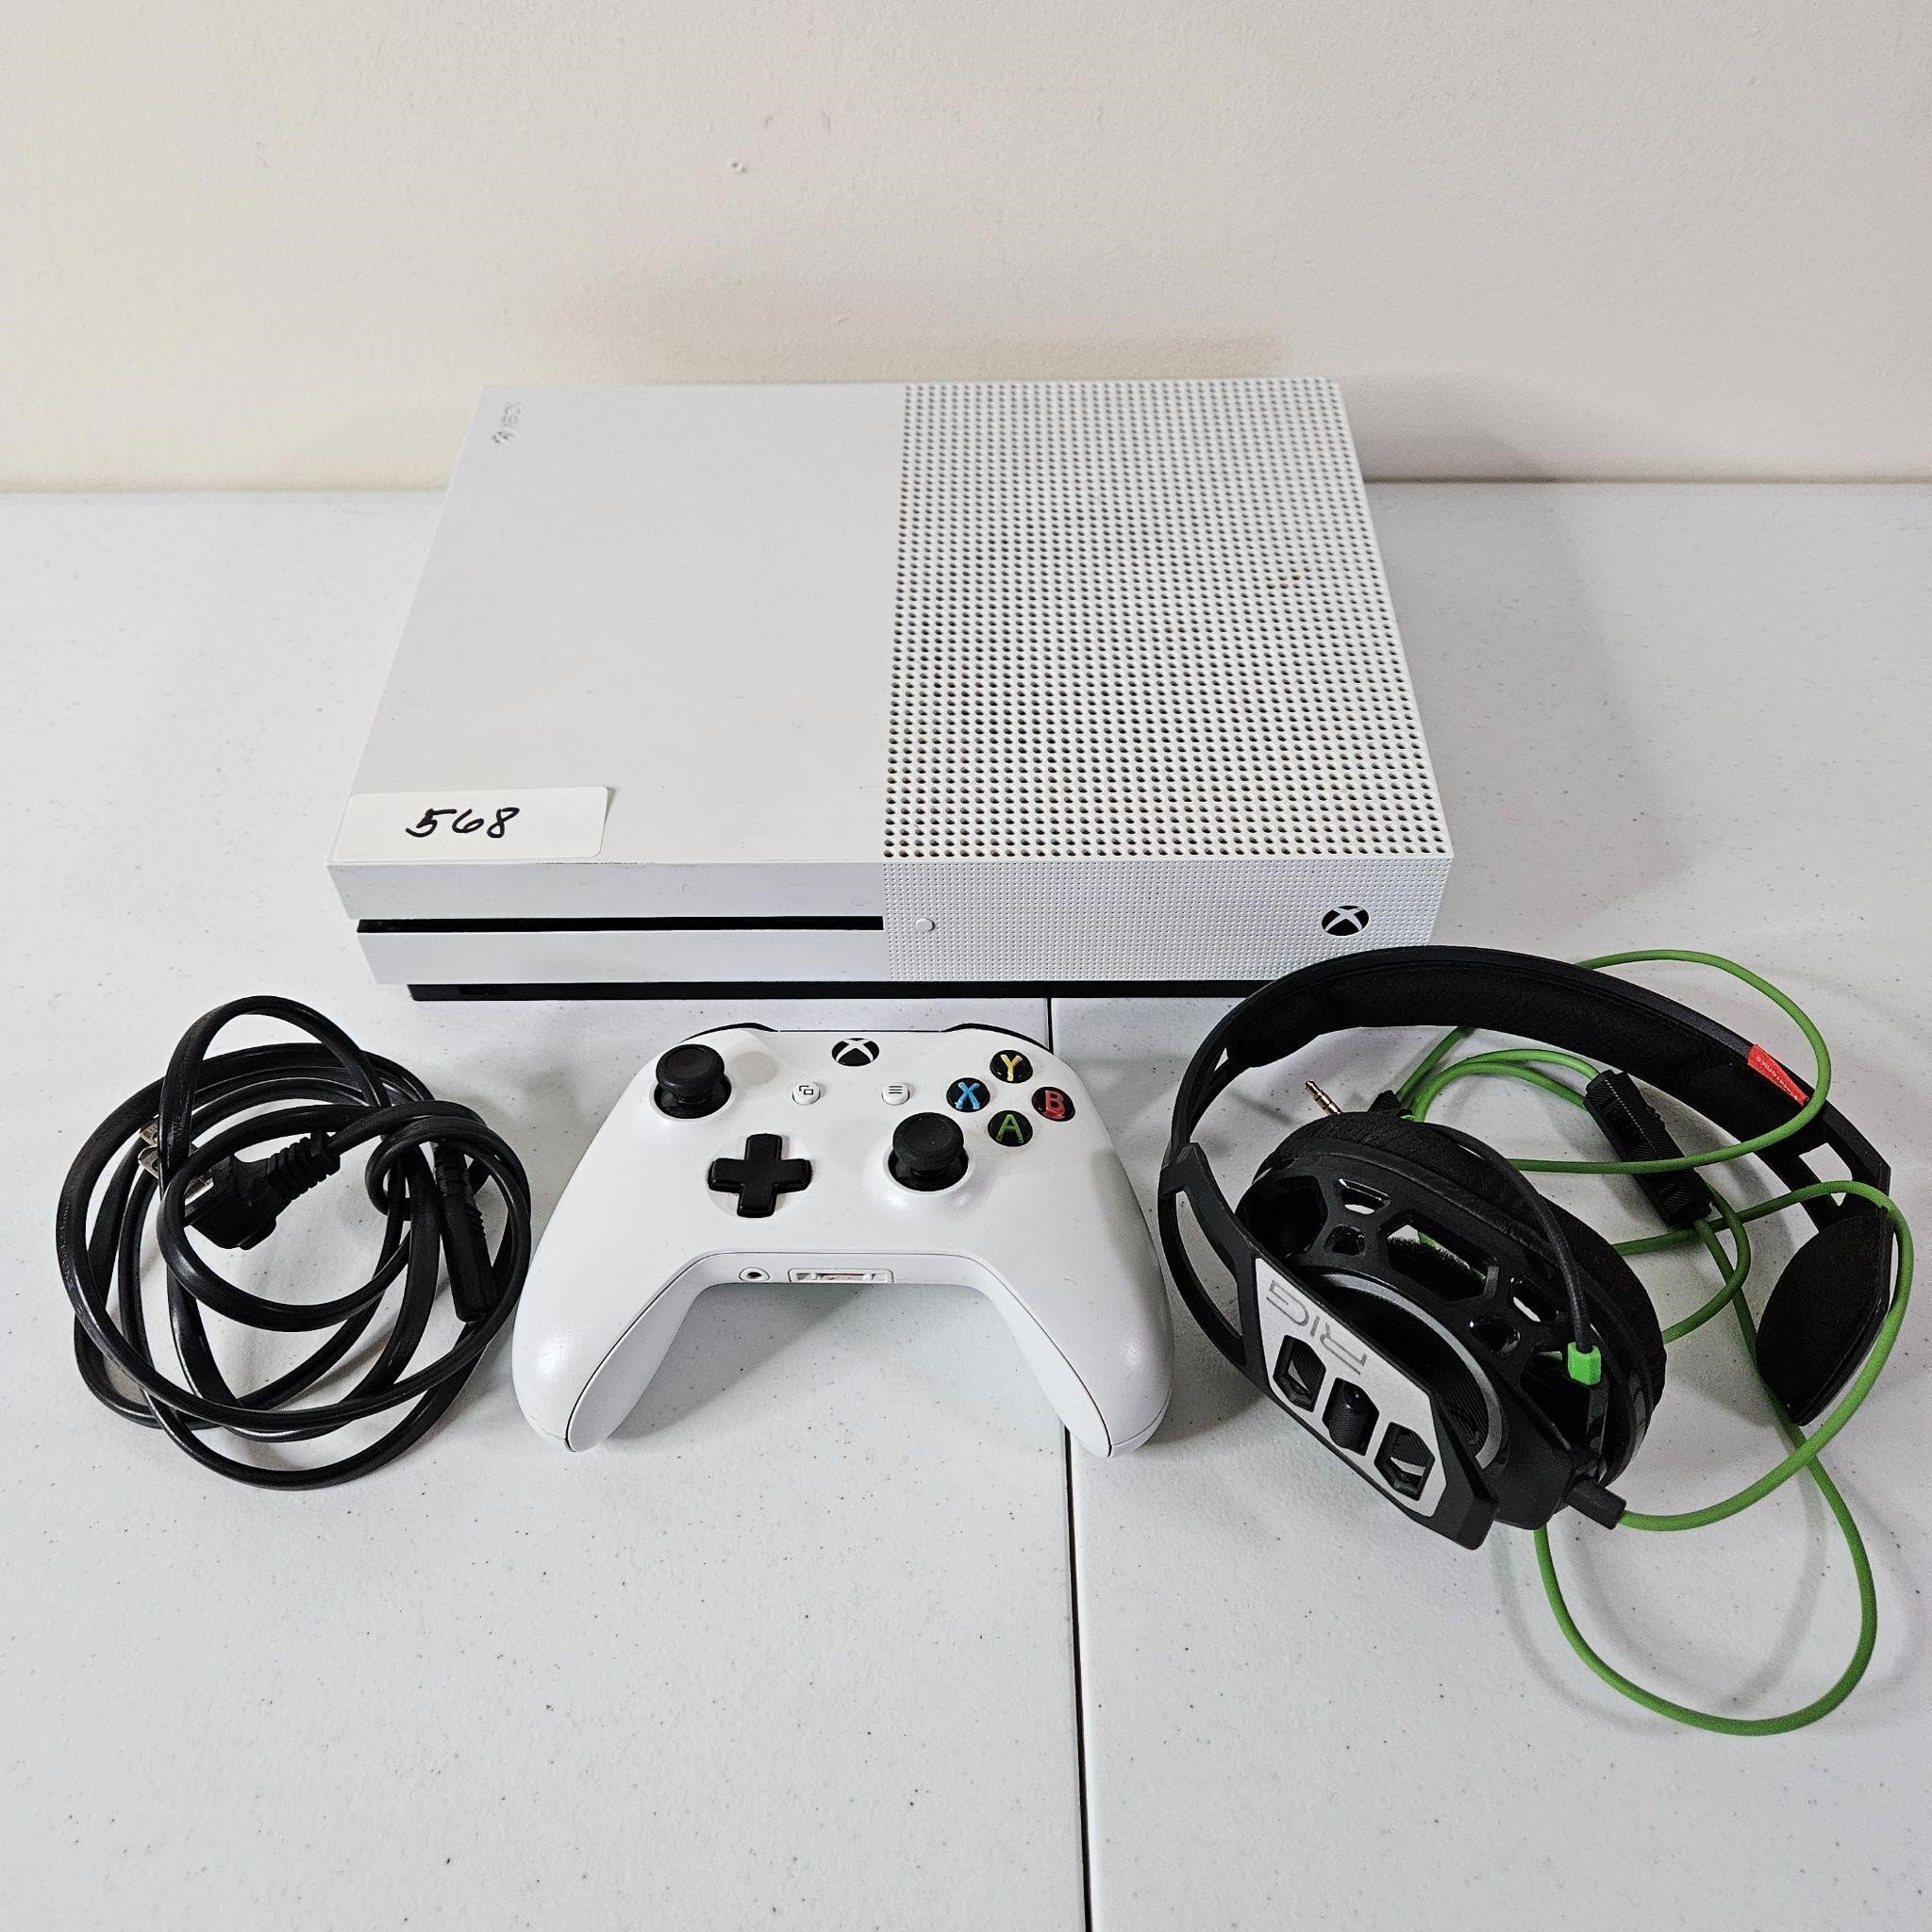 Xbox One S 500GB W/ Controller & Power Cord